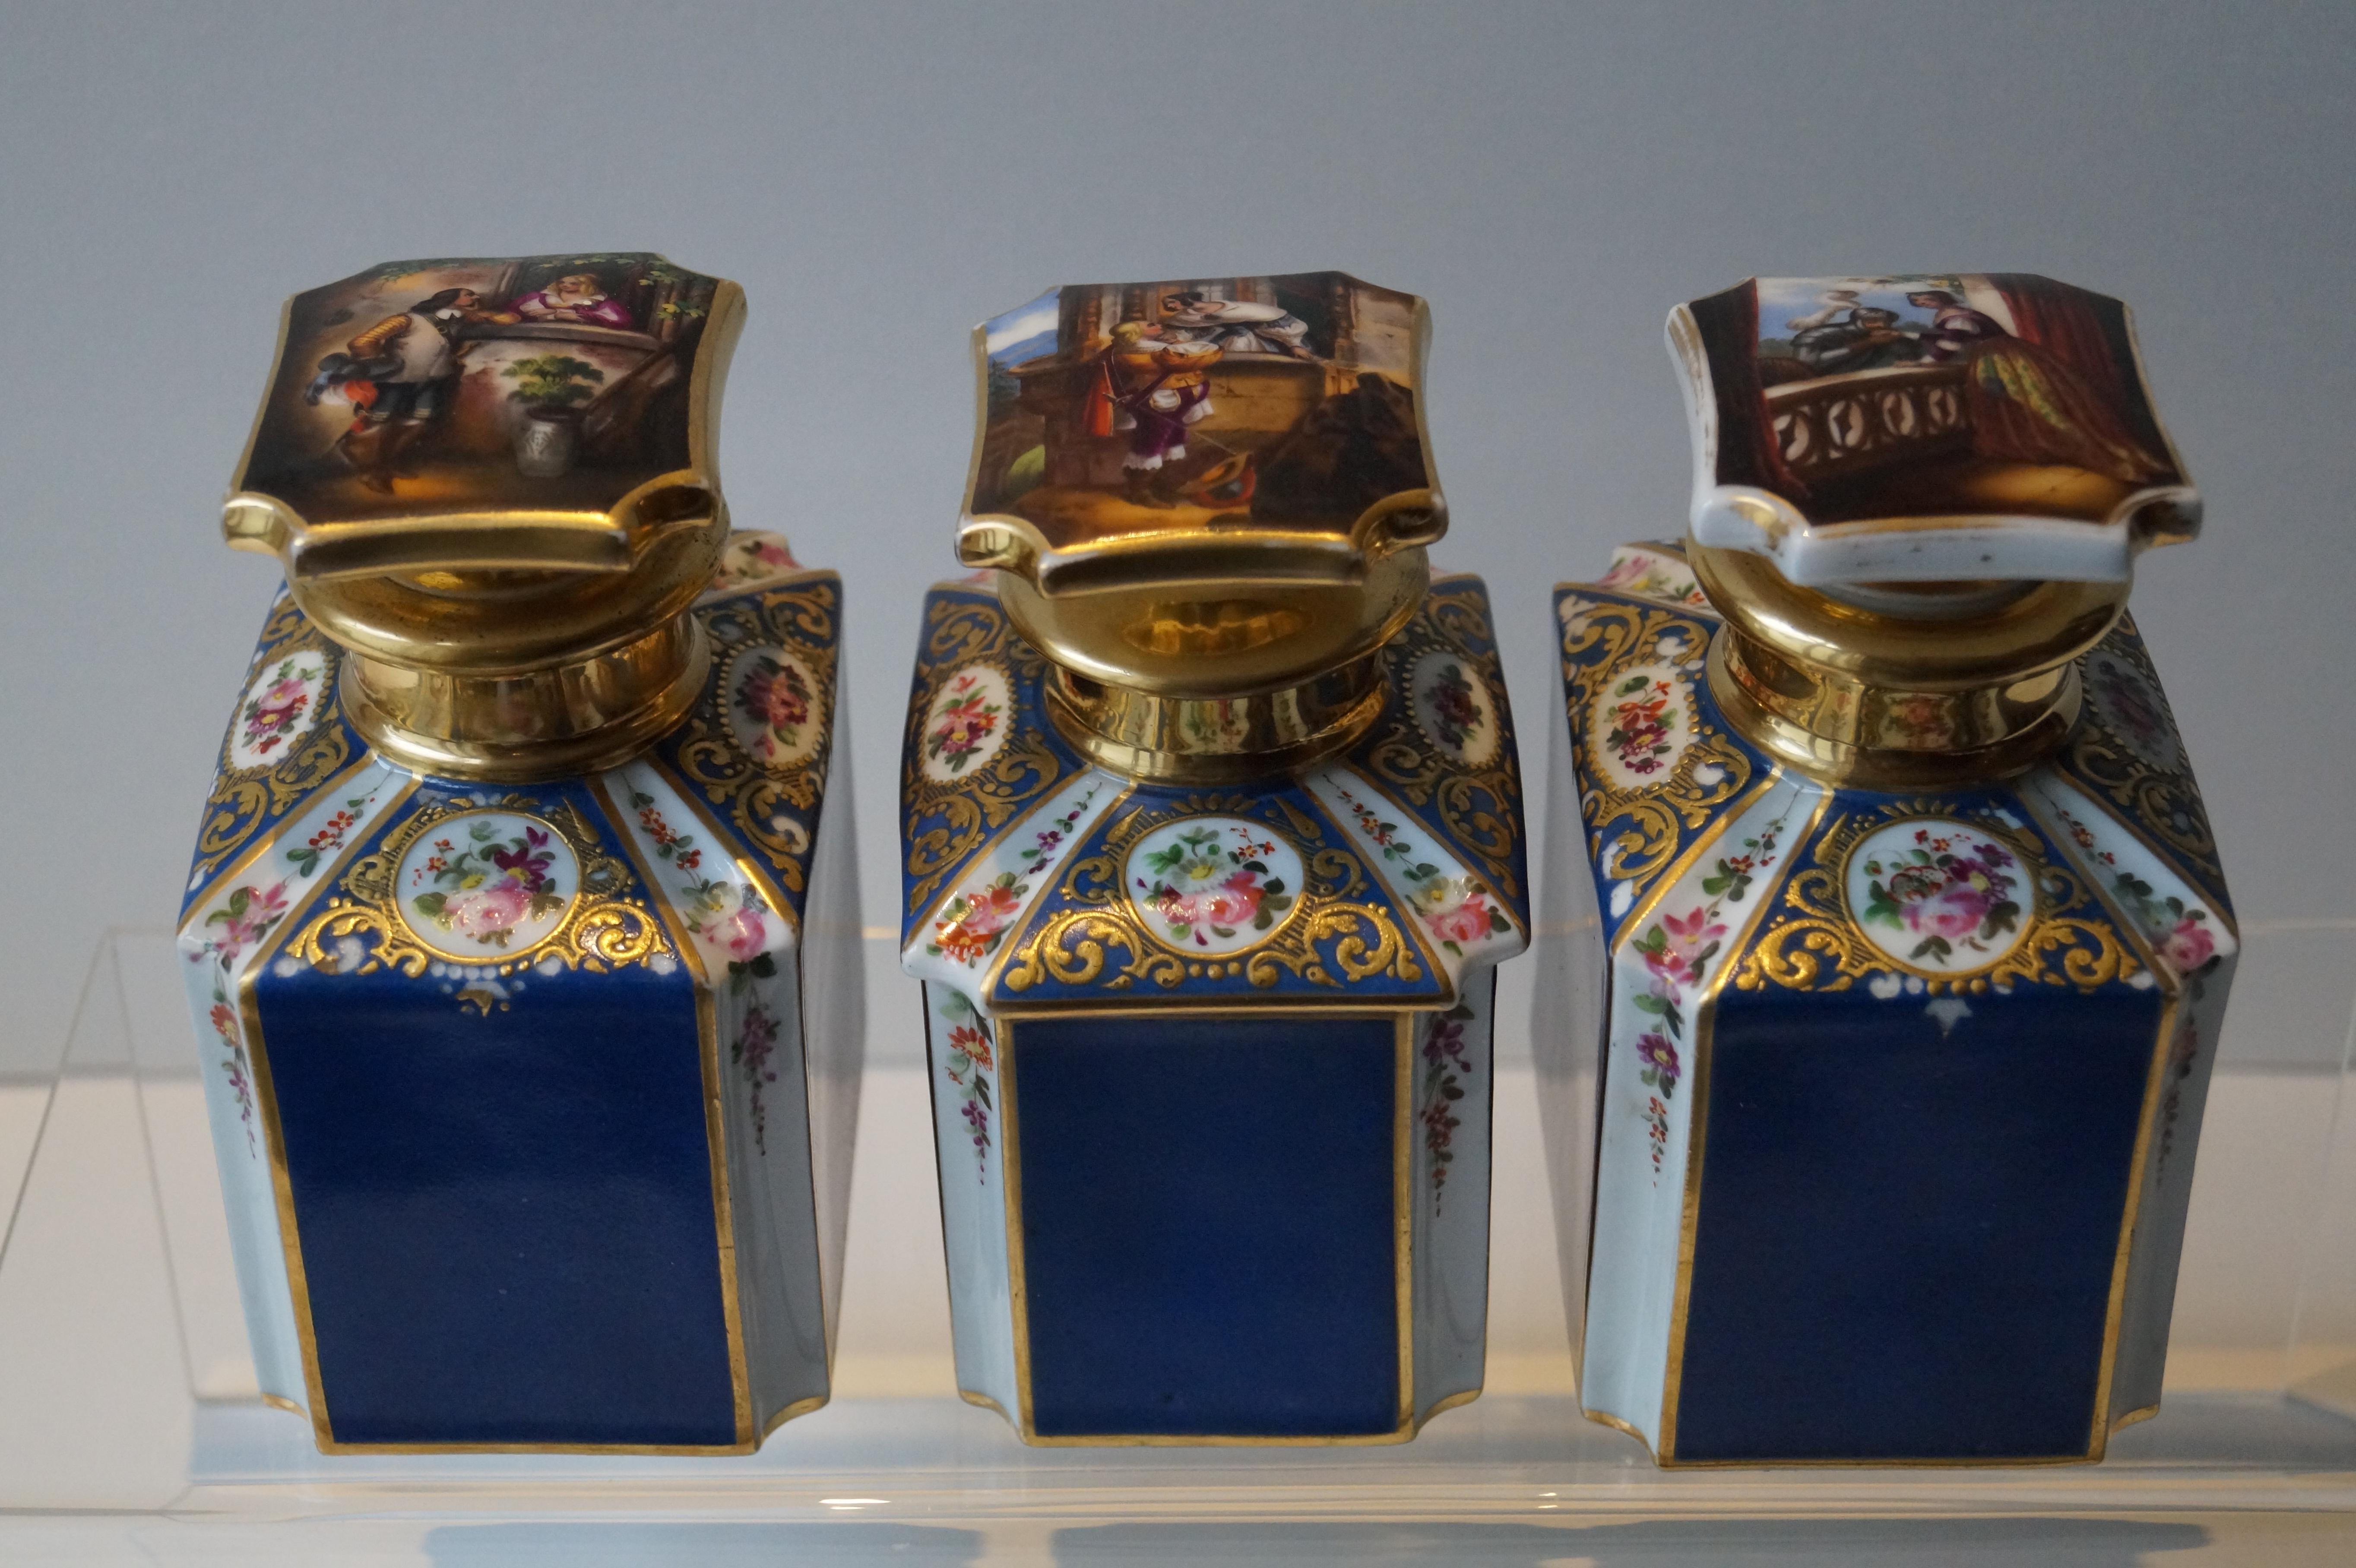 Three beautiful rare tea caddies richly decorated with gold and panels with flowers.

On the top of the lids three different hand painted images of couples in love.

Excelent wedding gift!

Good condition. Some wear consistent of